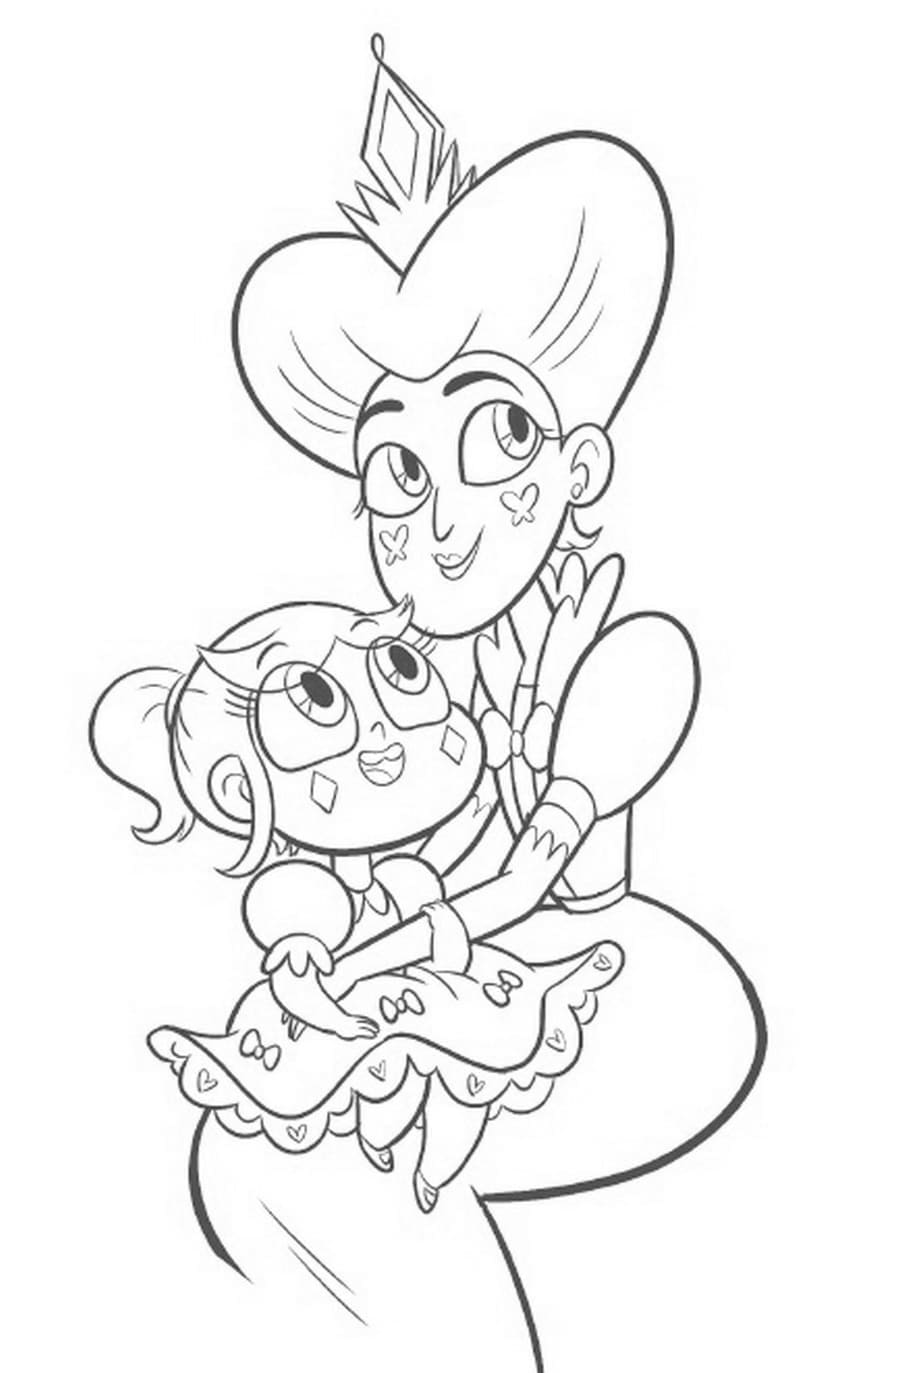 Star and Mom Coloring Page